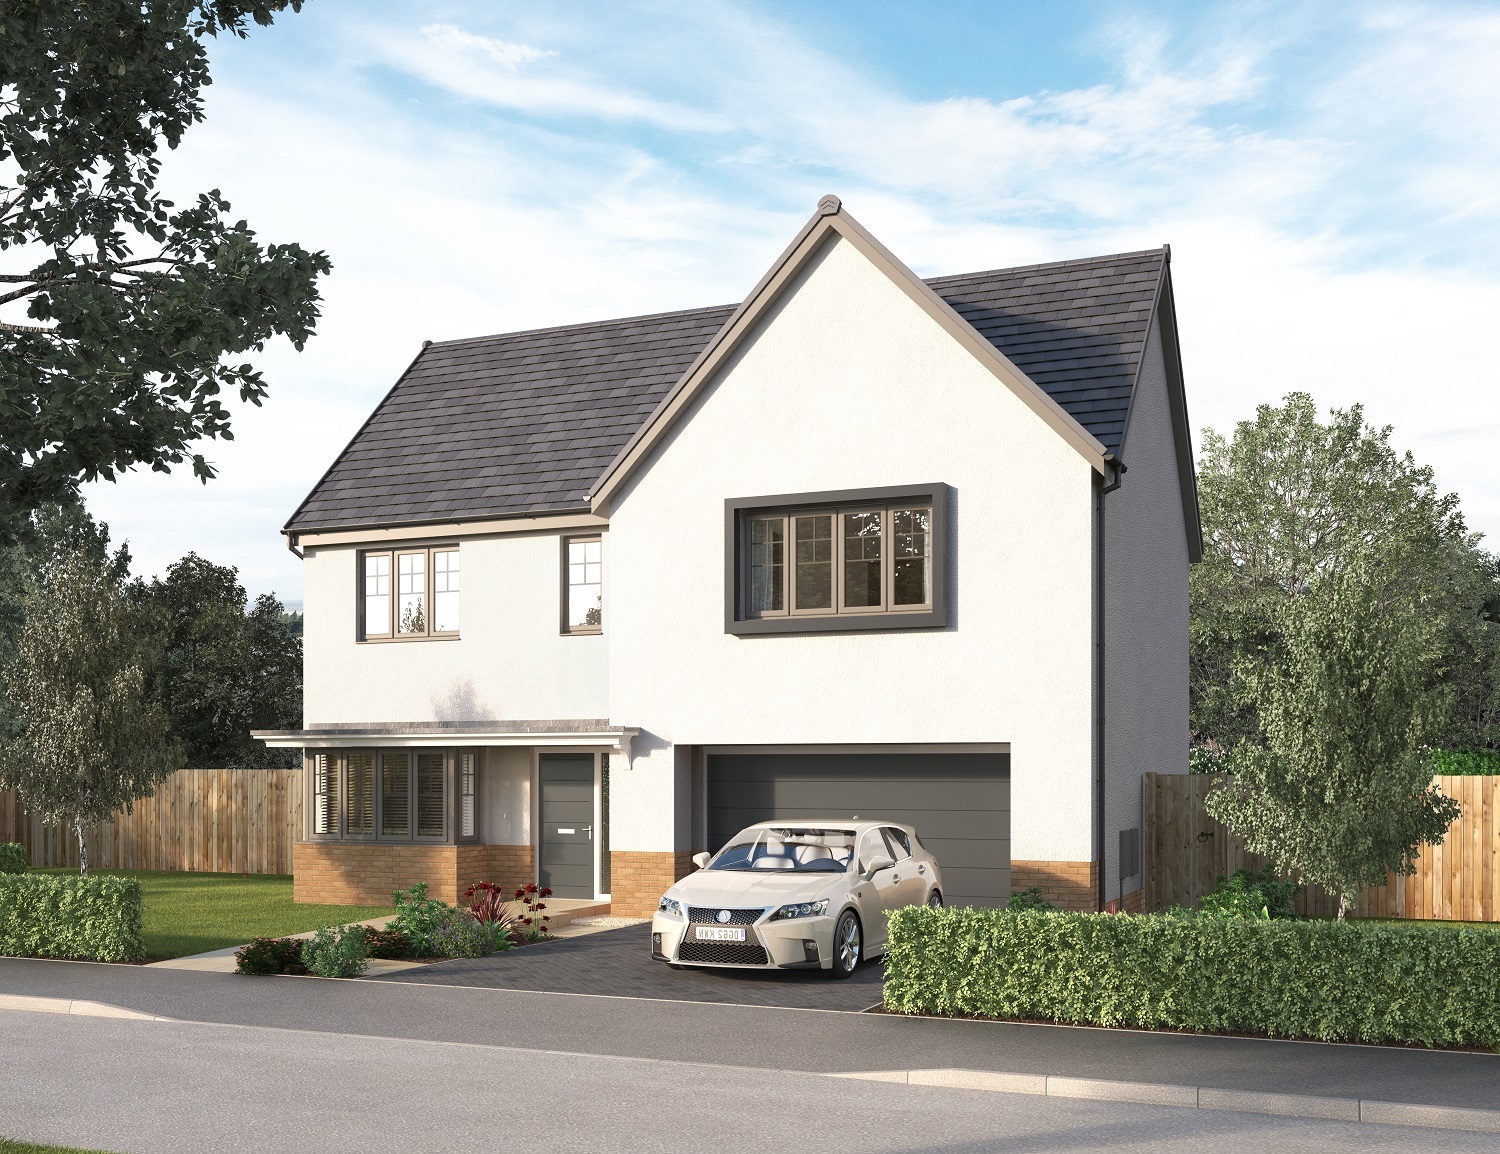 Avant Homes Scotland purchases land for 252 homes in Jackton